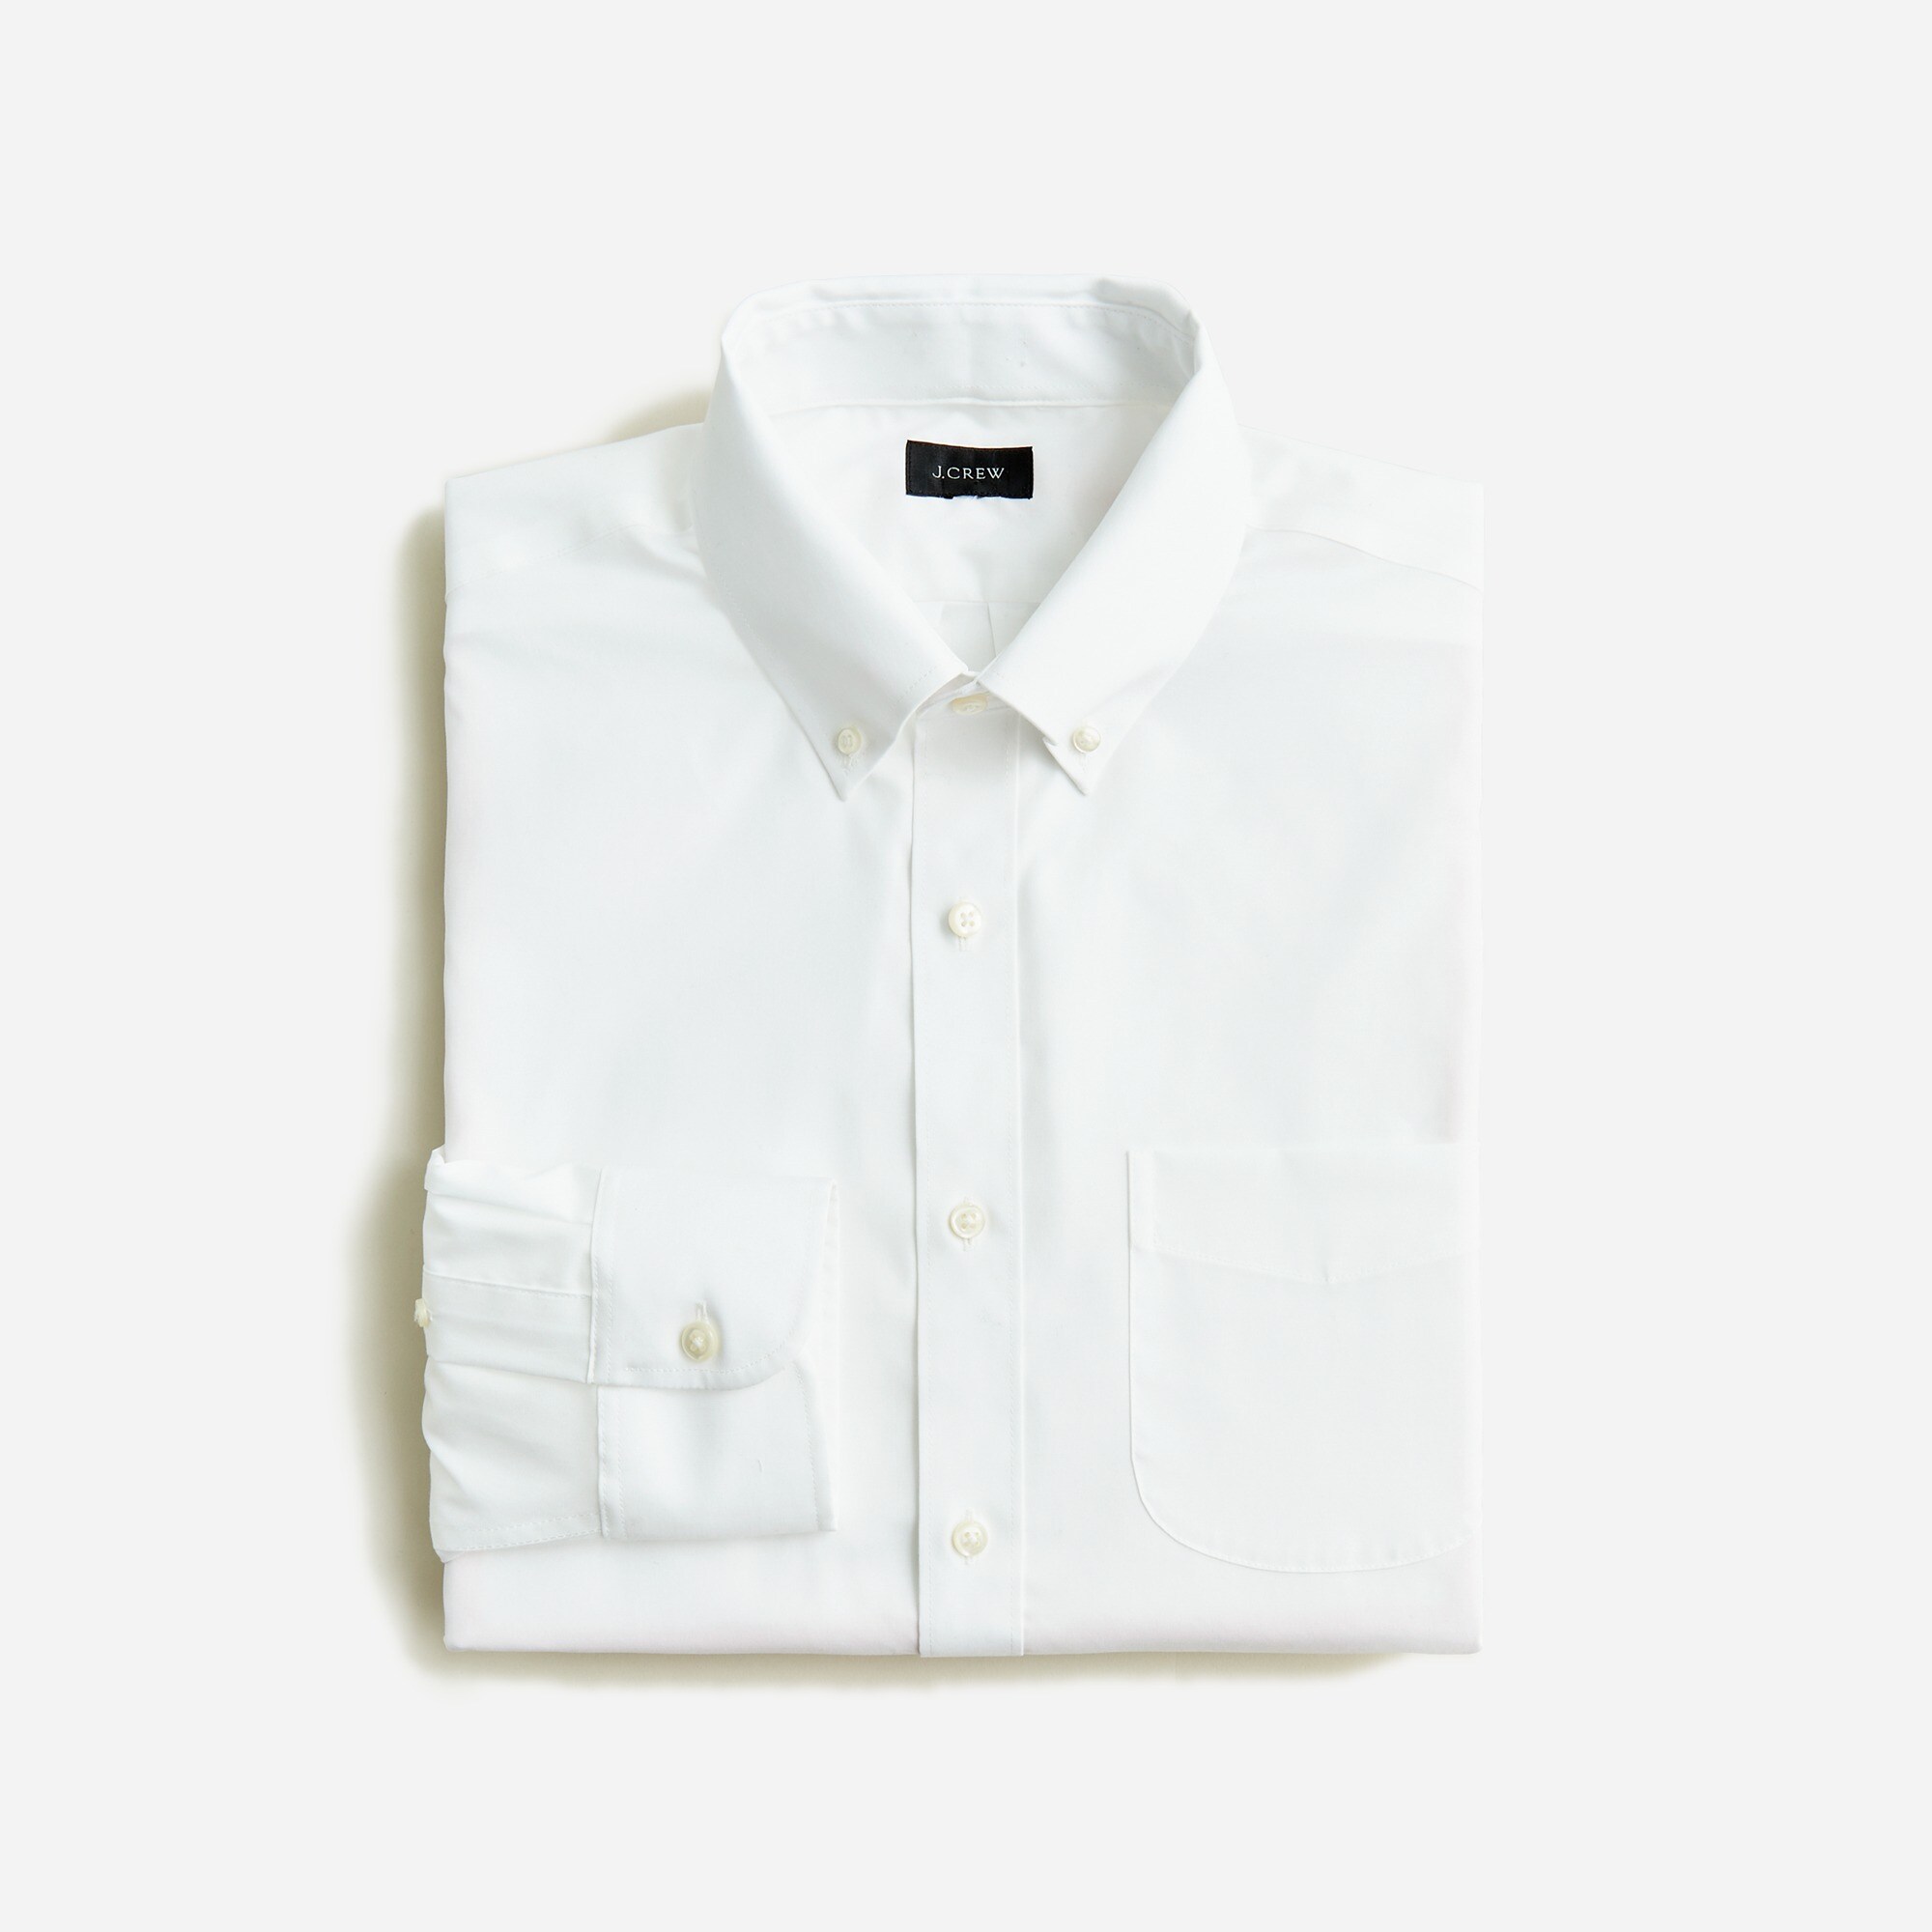  Bowery wrinkle-free dress shirt with button-down collar